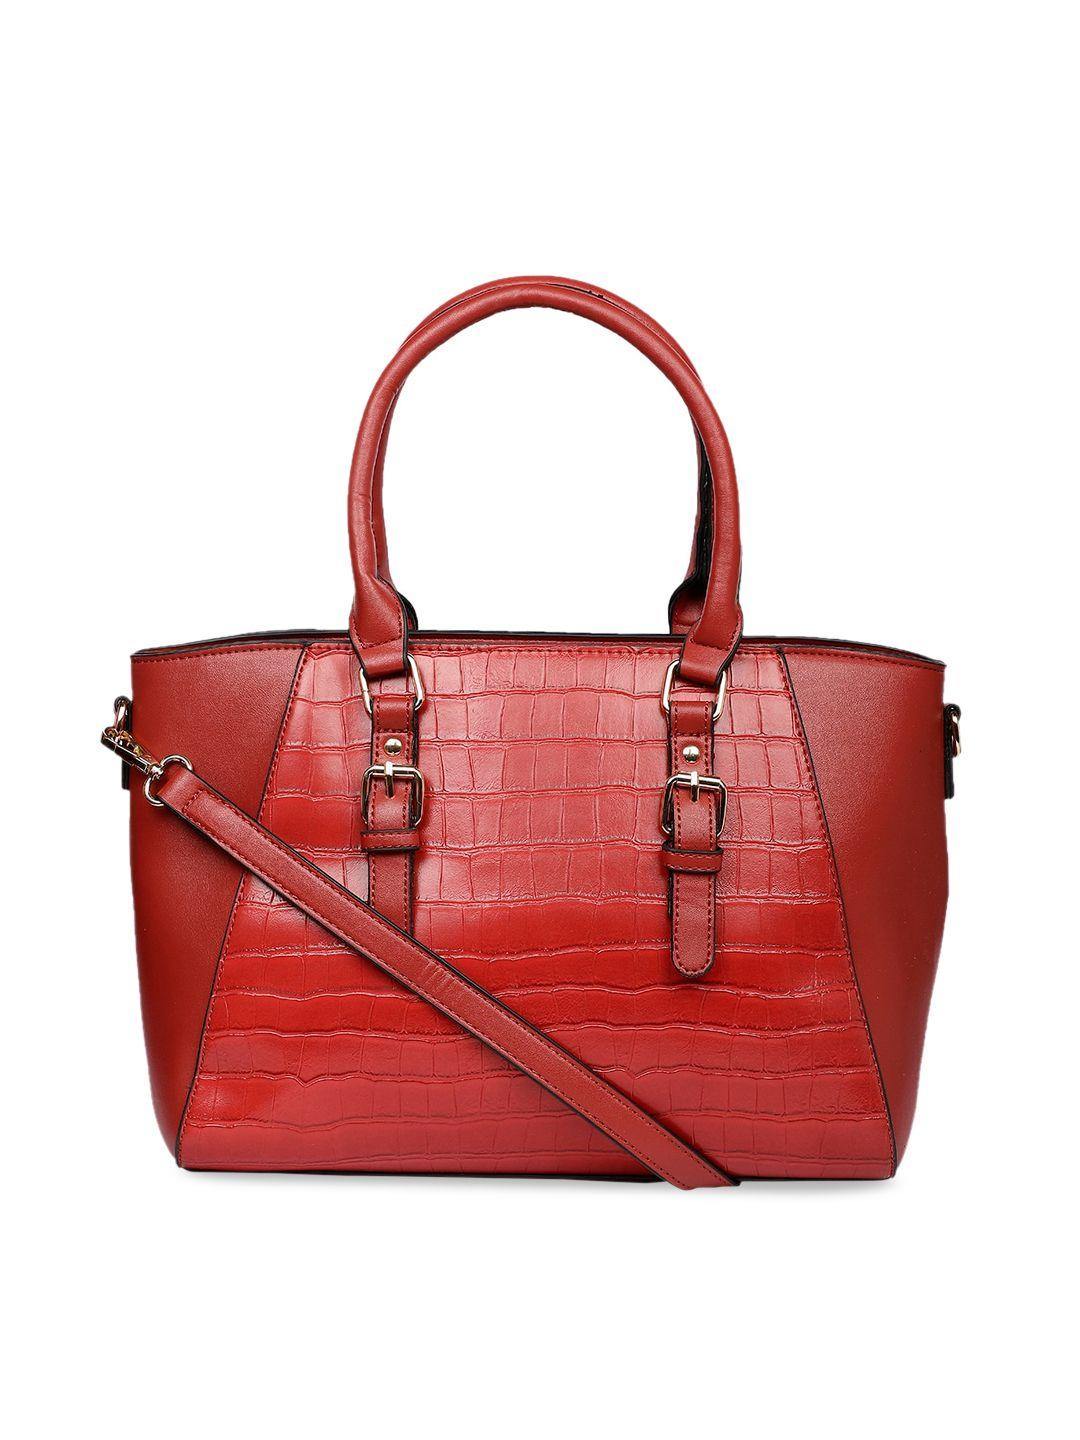 marie claire red textured structured shoulder bag